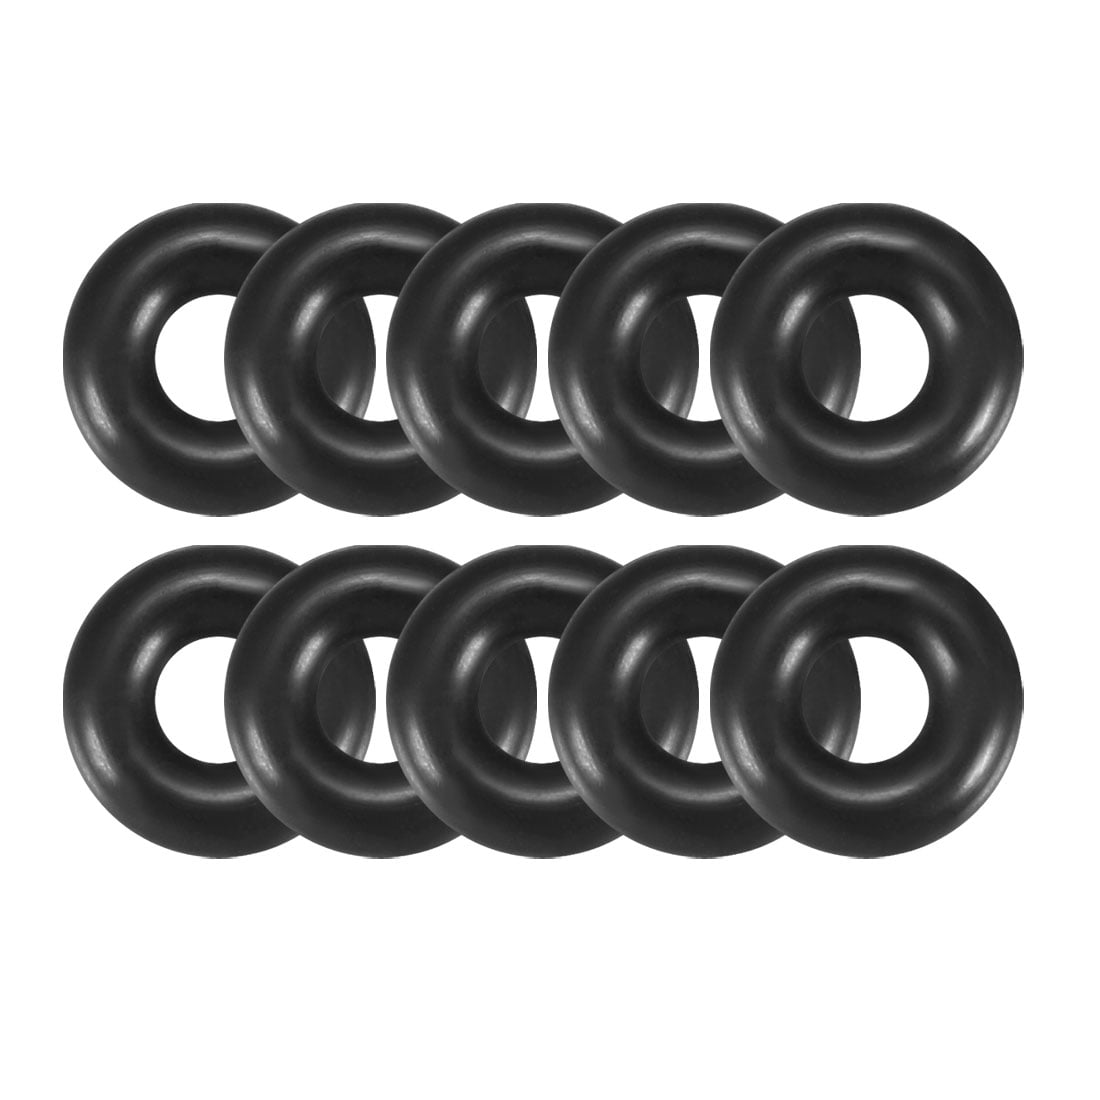 uxcell 15Pcs 6mm x 14mm x 2.5mm Rubber Oil Sealing O-Rings Washer Gasket Black 